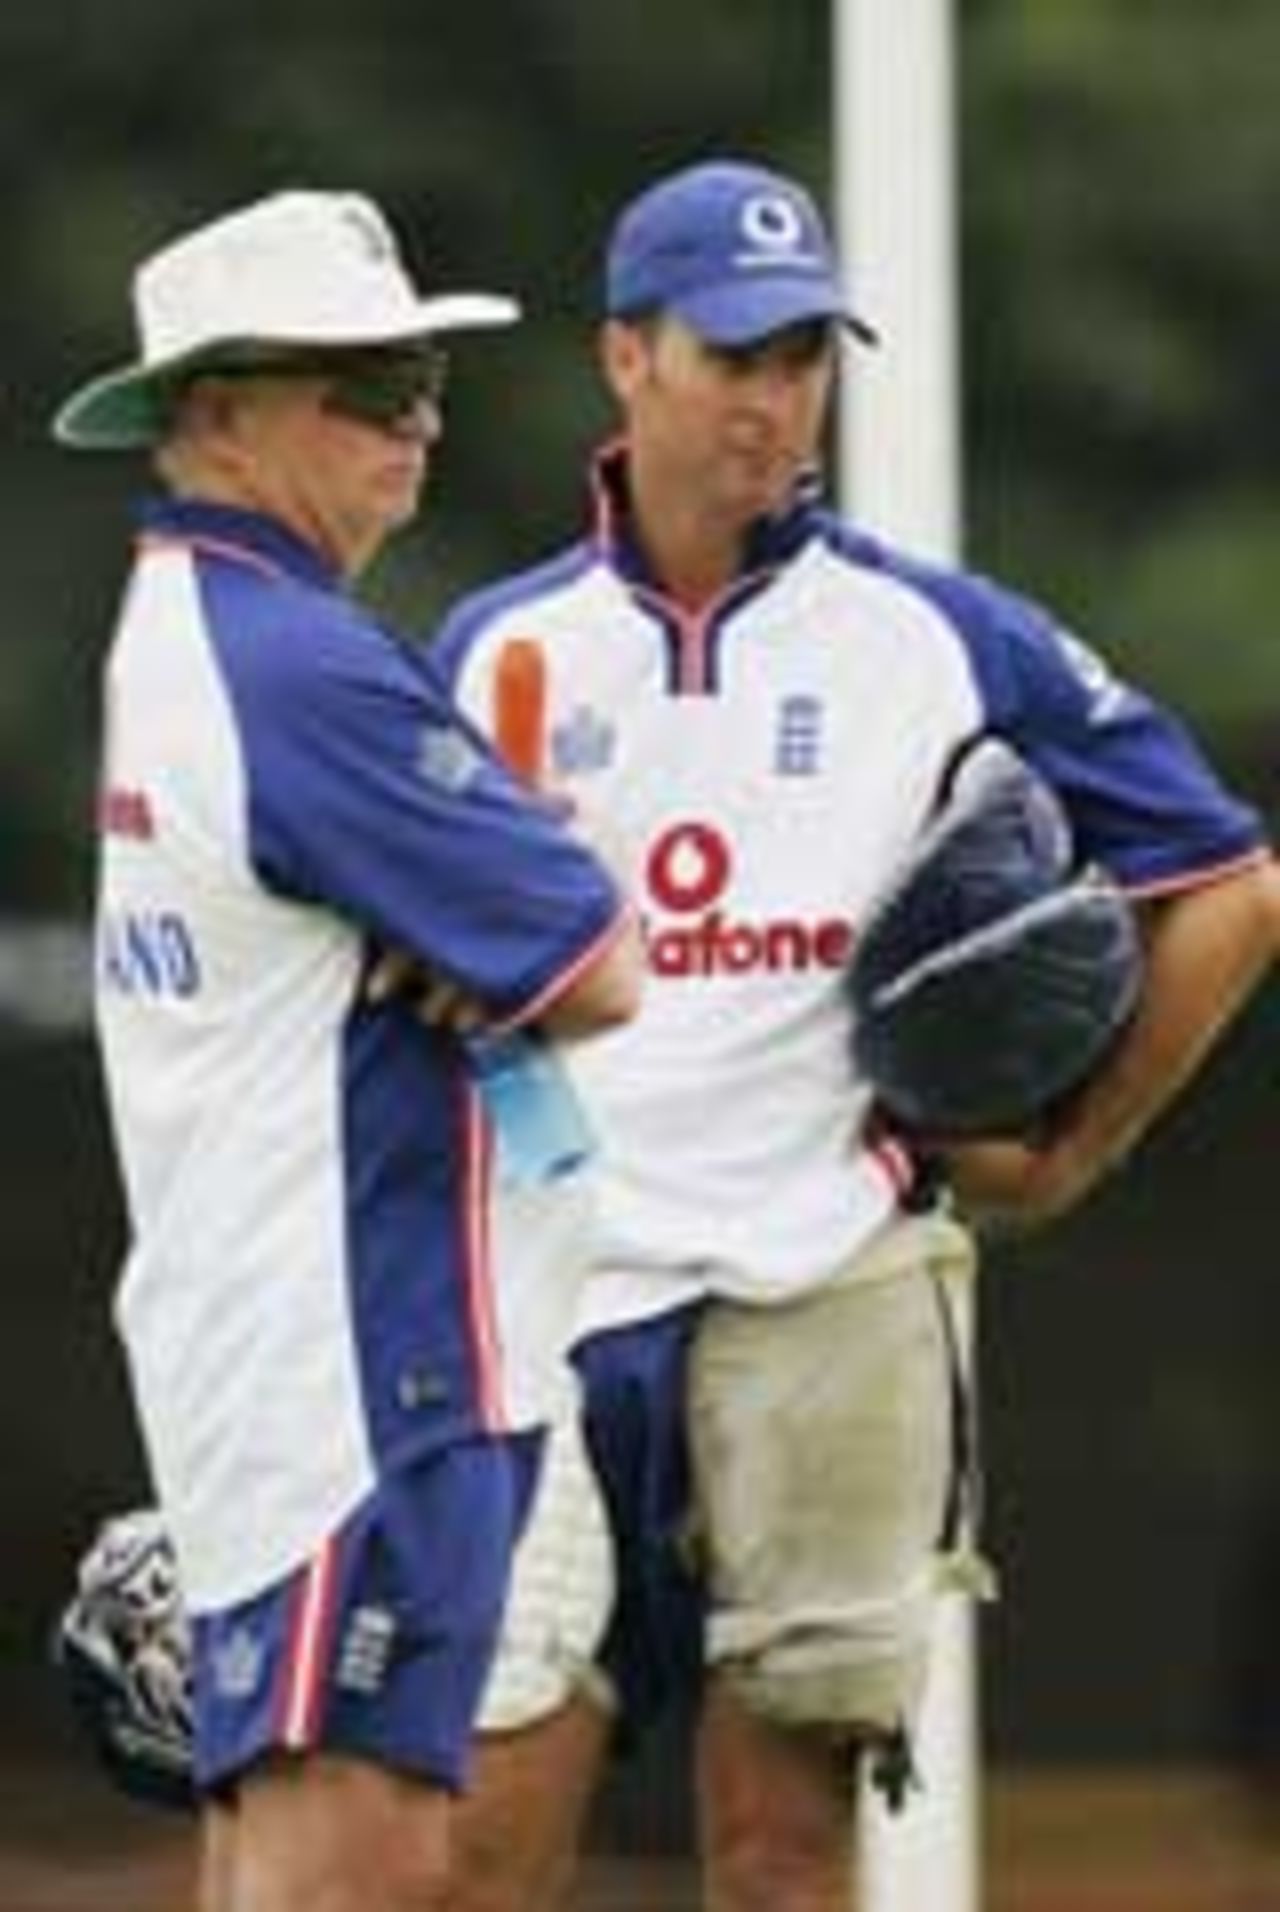 Michael Vaughan and Duncan Fletcher at practice ahead of the one-day series against South Africa, January 29, 2005